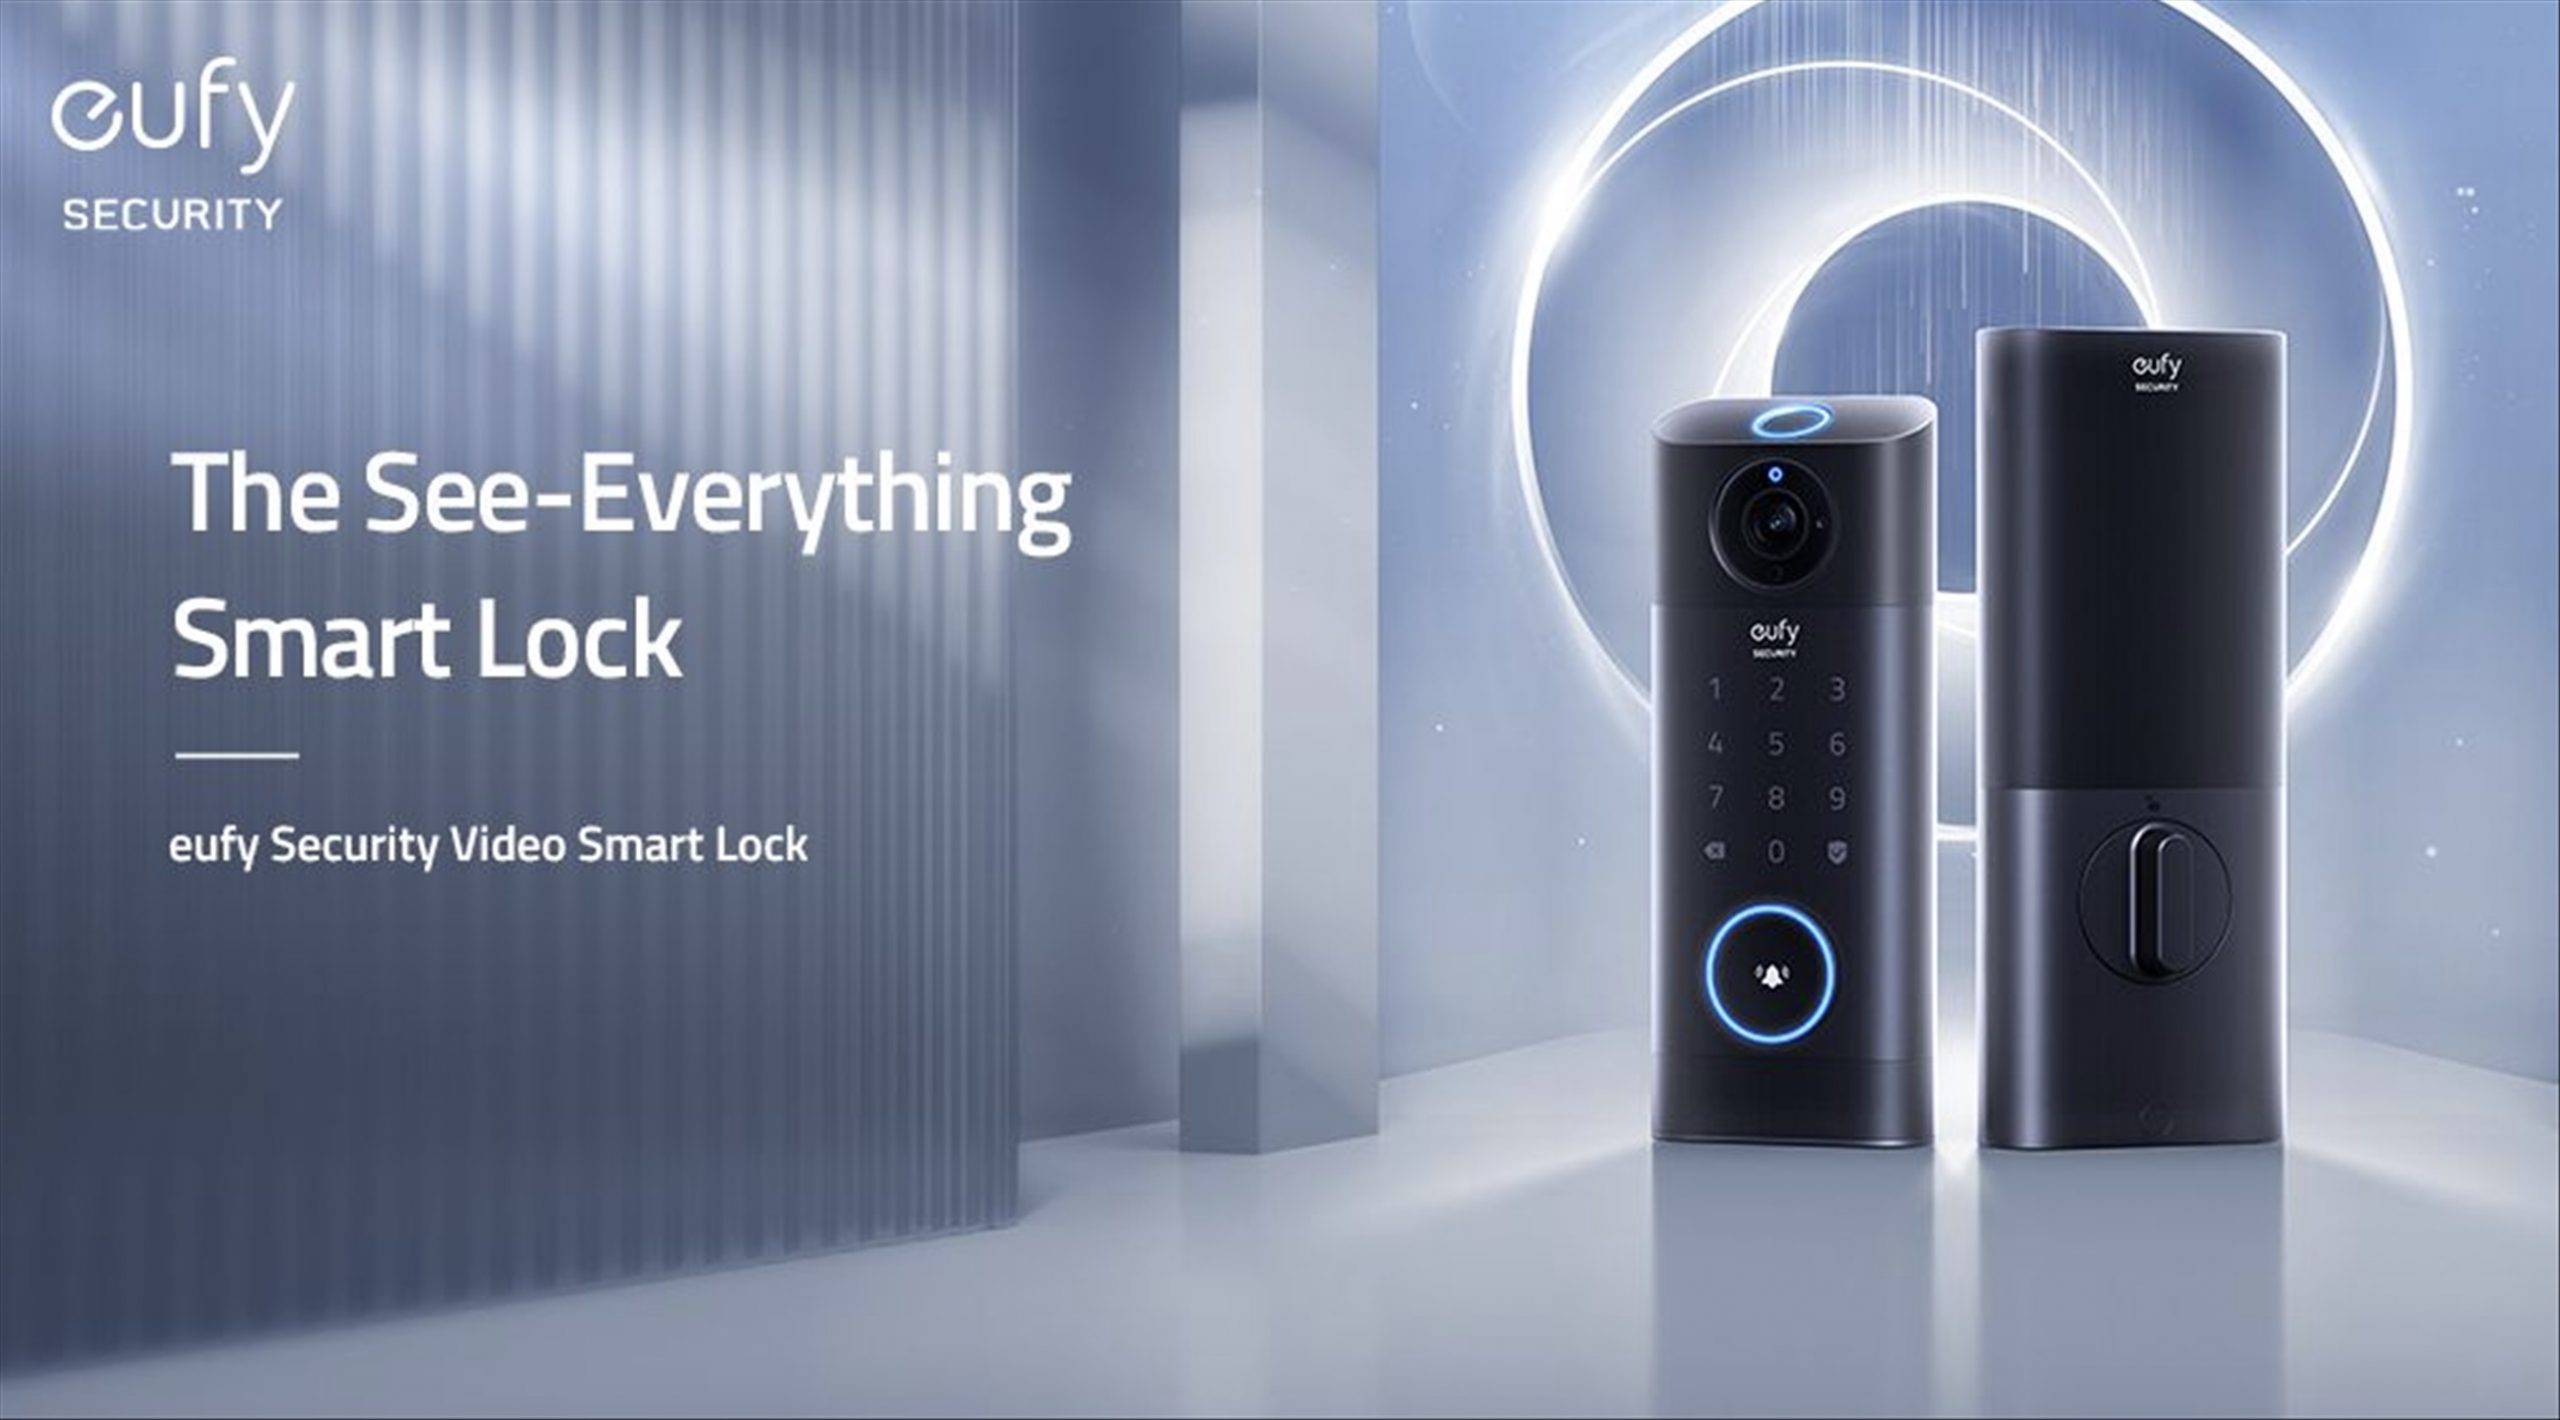 Anker announces new eufy Security Video Smart Lock with 2K camera and advanced detection